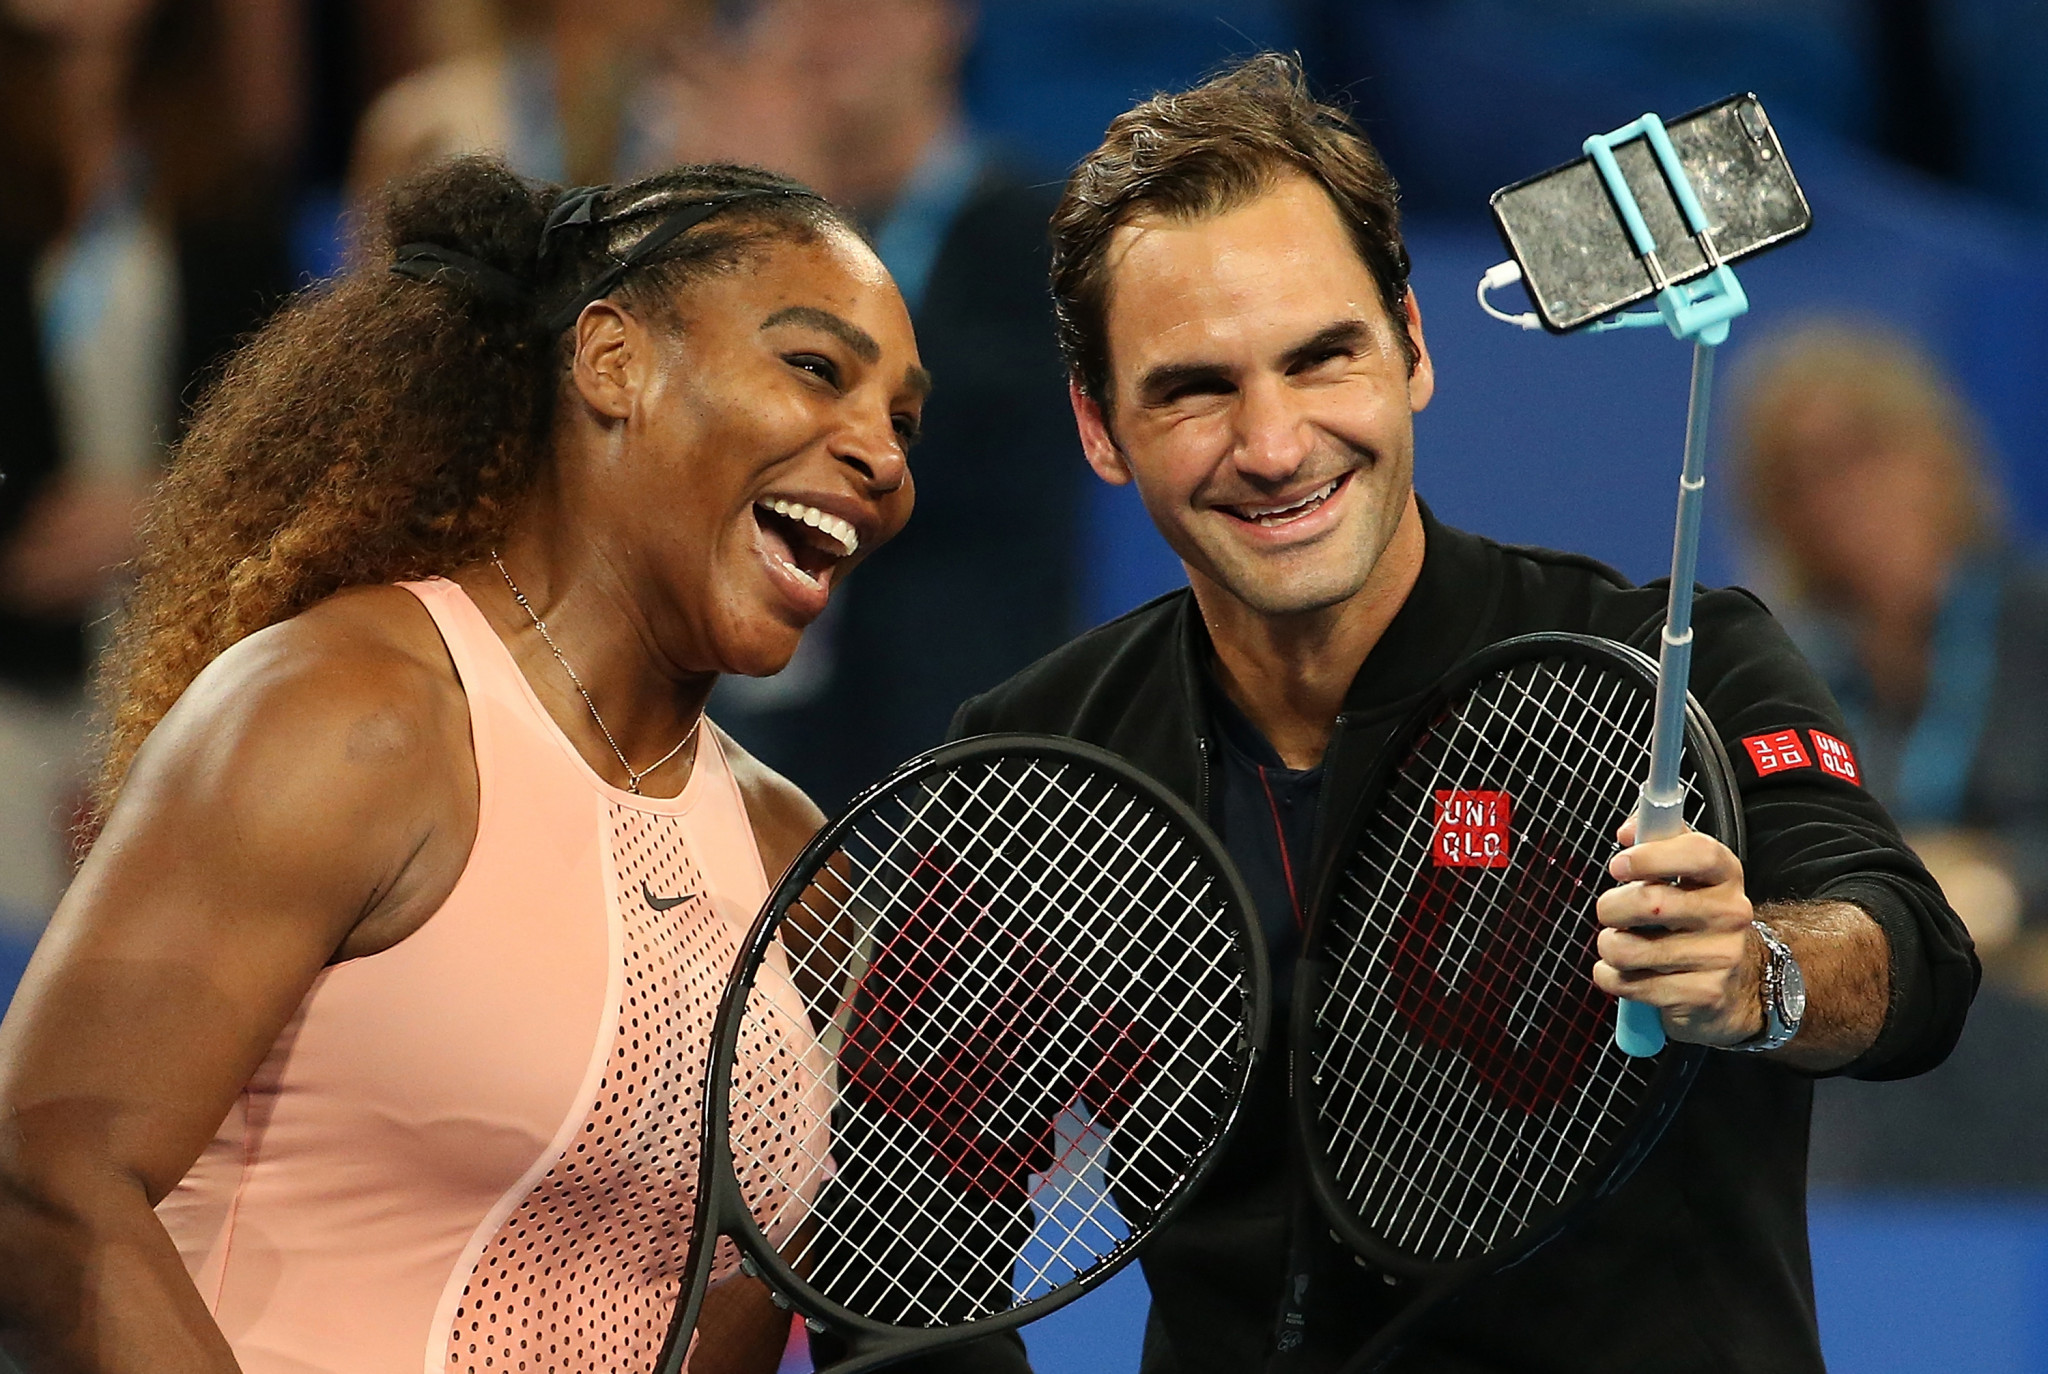 Serena Williams and Roger Federer played against each other competitively for the first time in January's Hopman Cup ©Getty Images